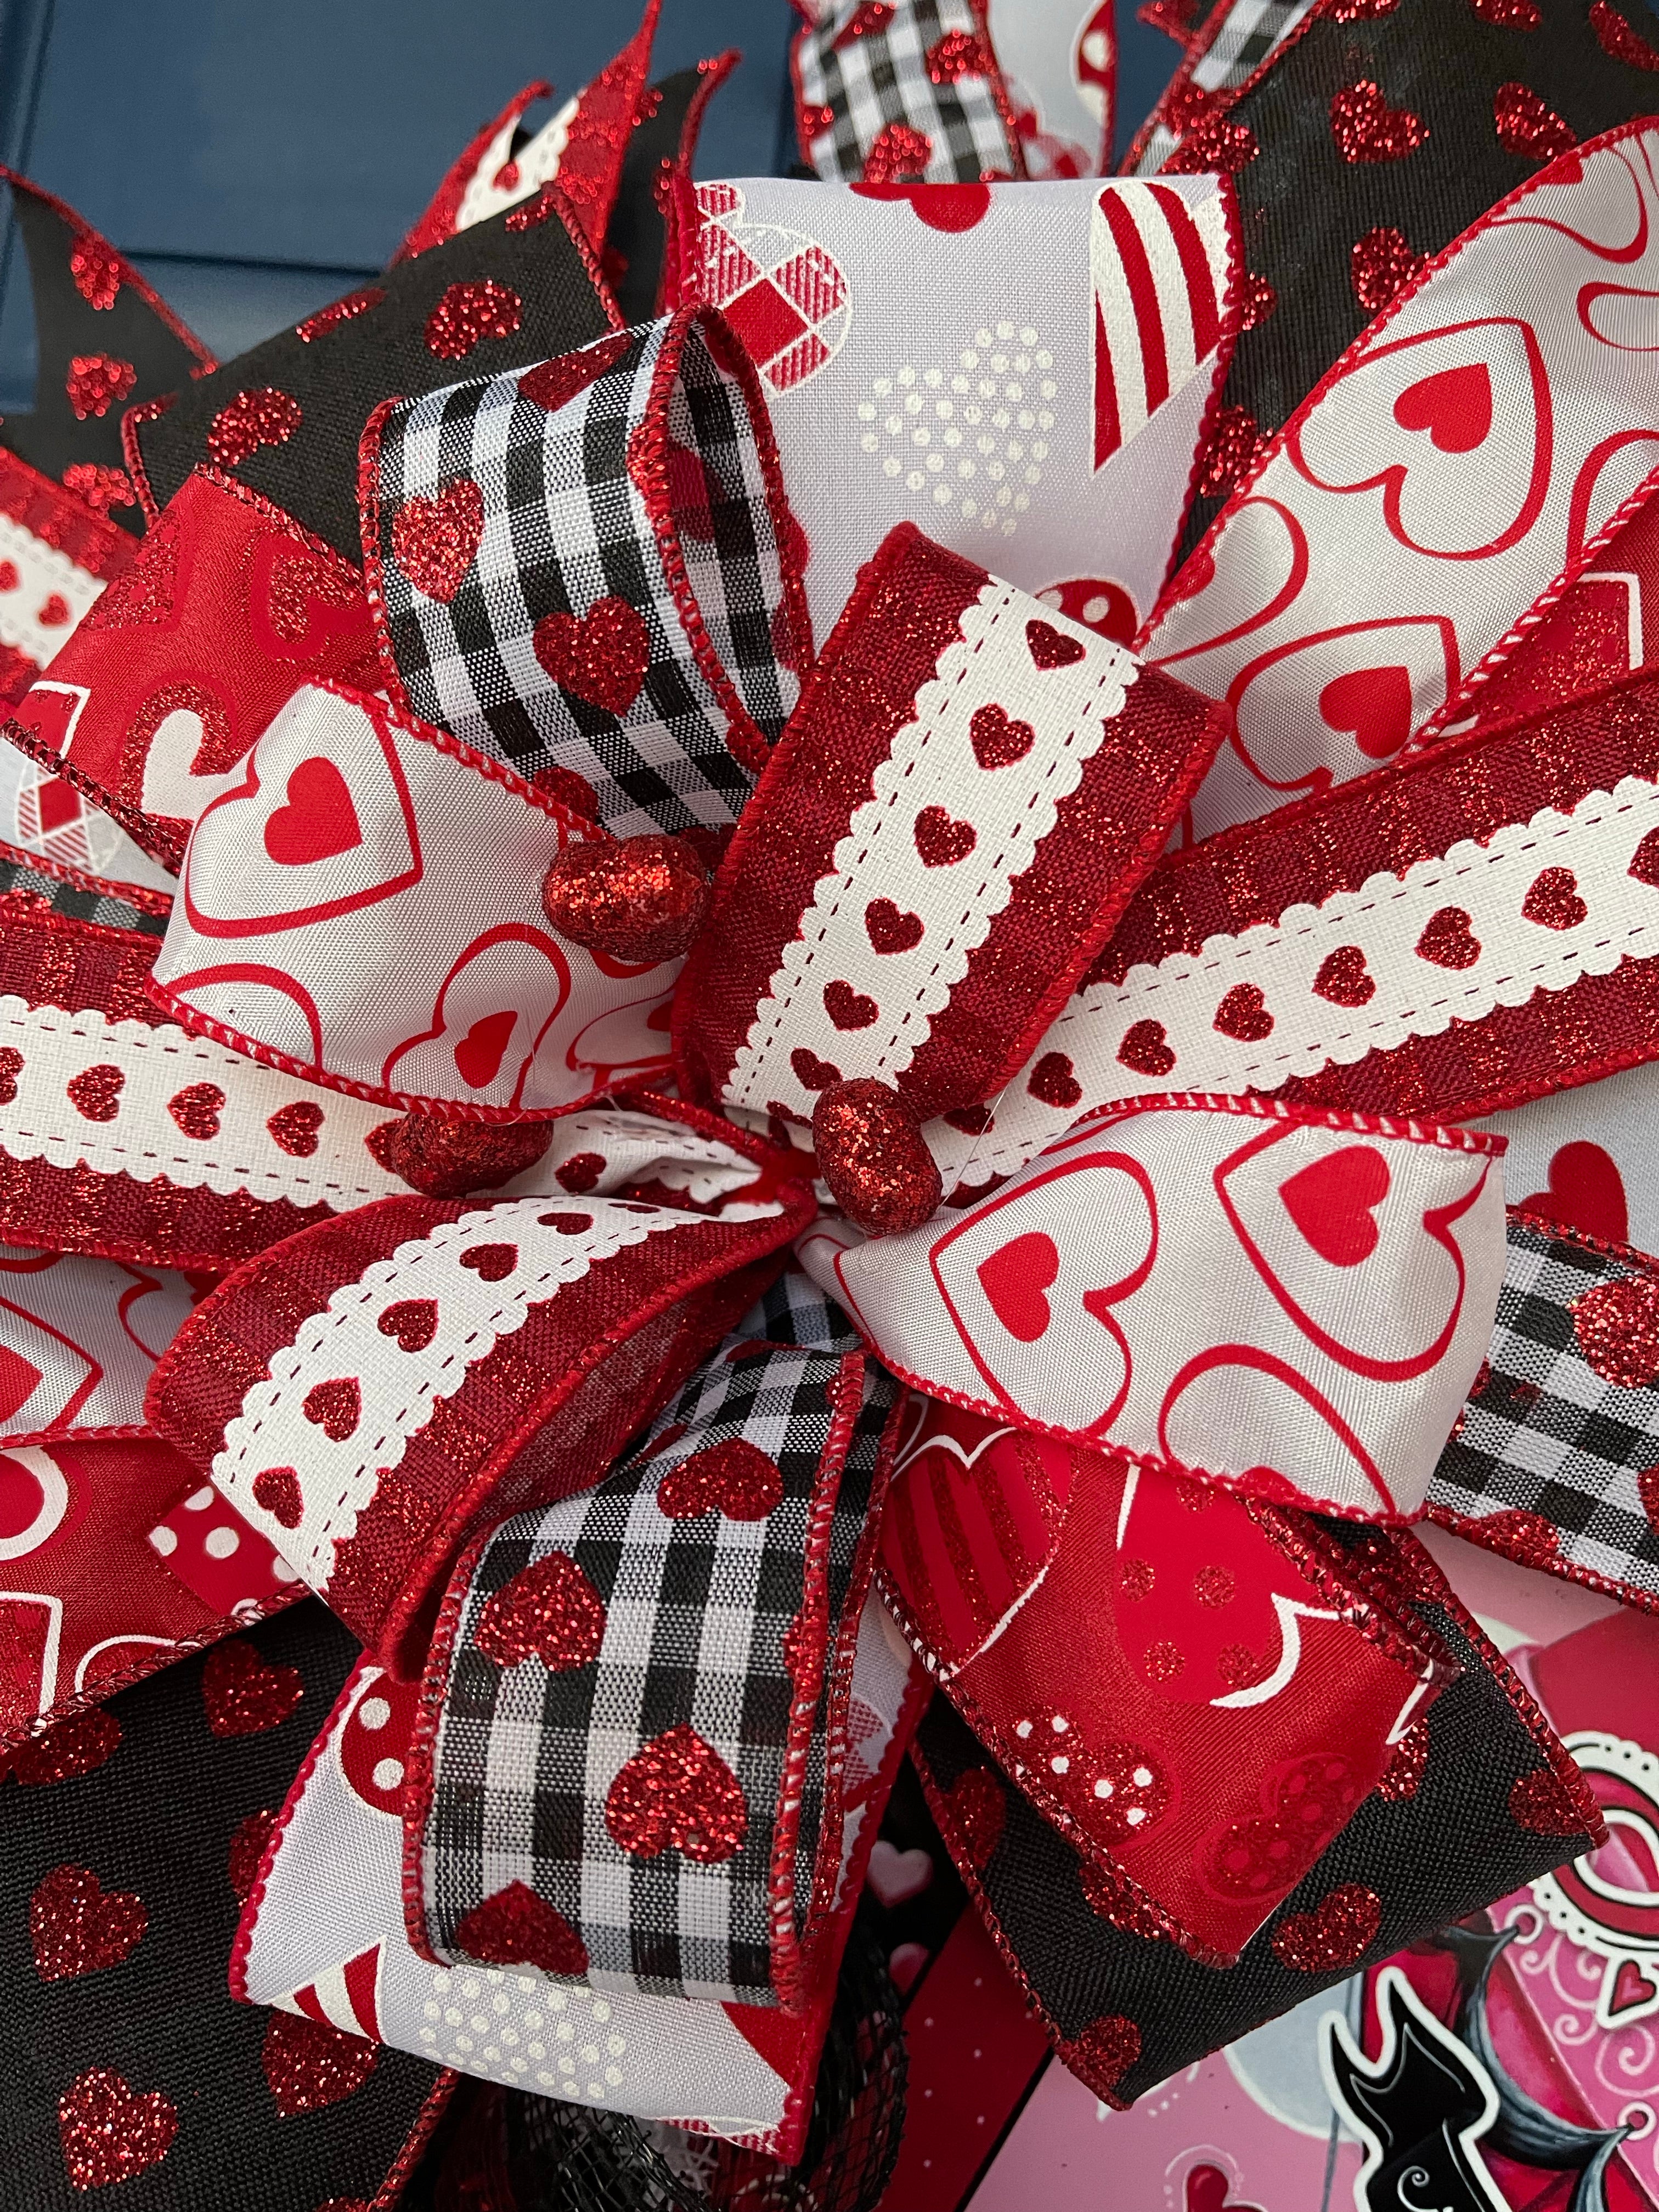 Close Up Detail of Bow featuring ribbons of Red, White and Black with Hearts with Red Glitter Hearts in the Center